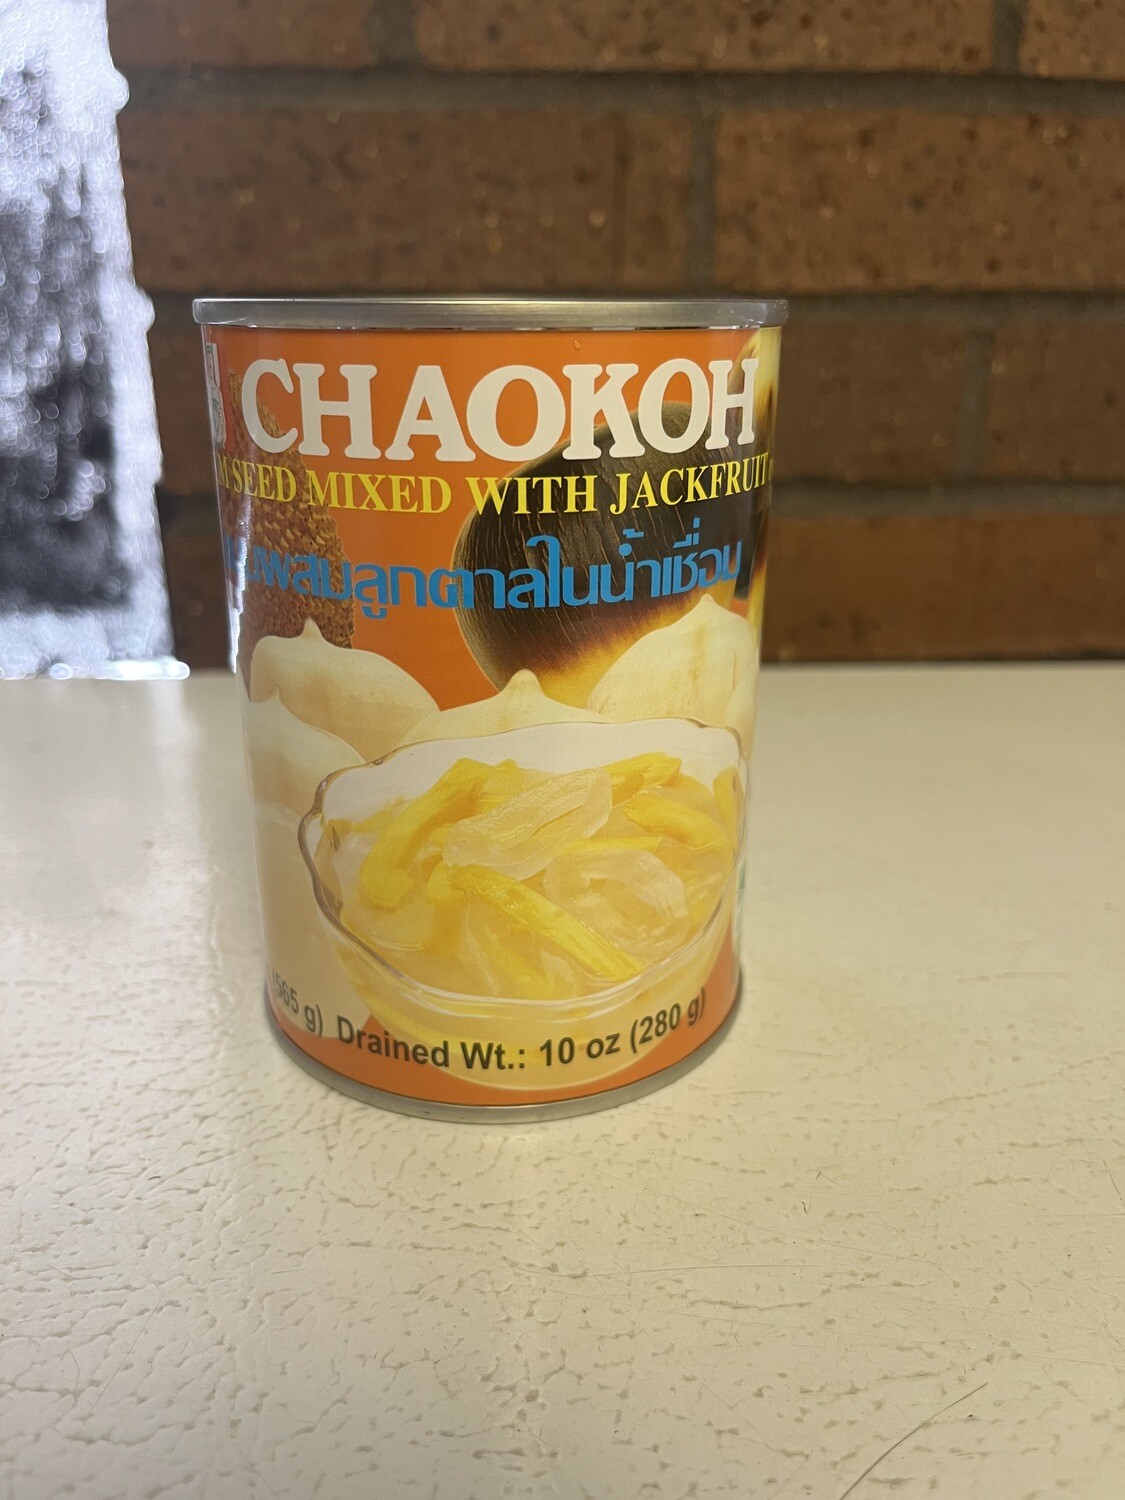 Chaokoh Toddy Palm Seed Mixed Jackfruit in syrup (can)